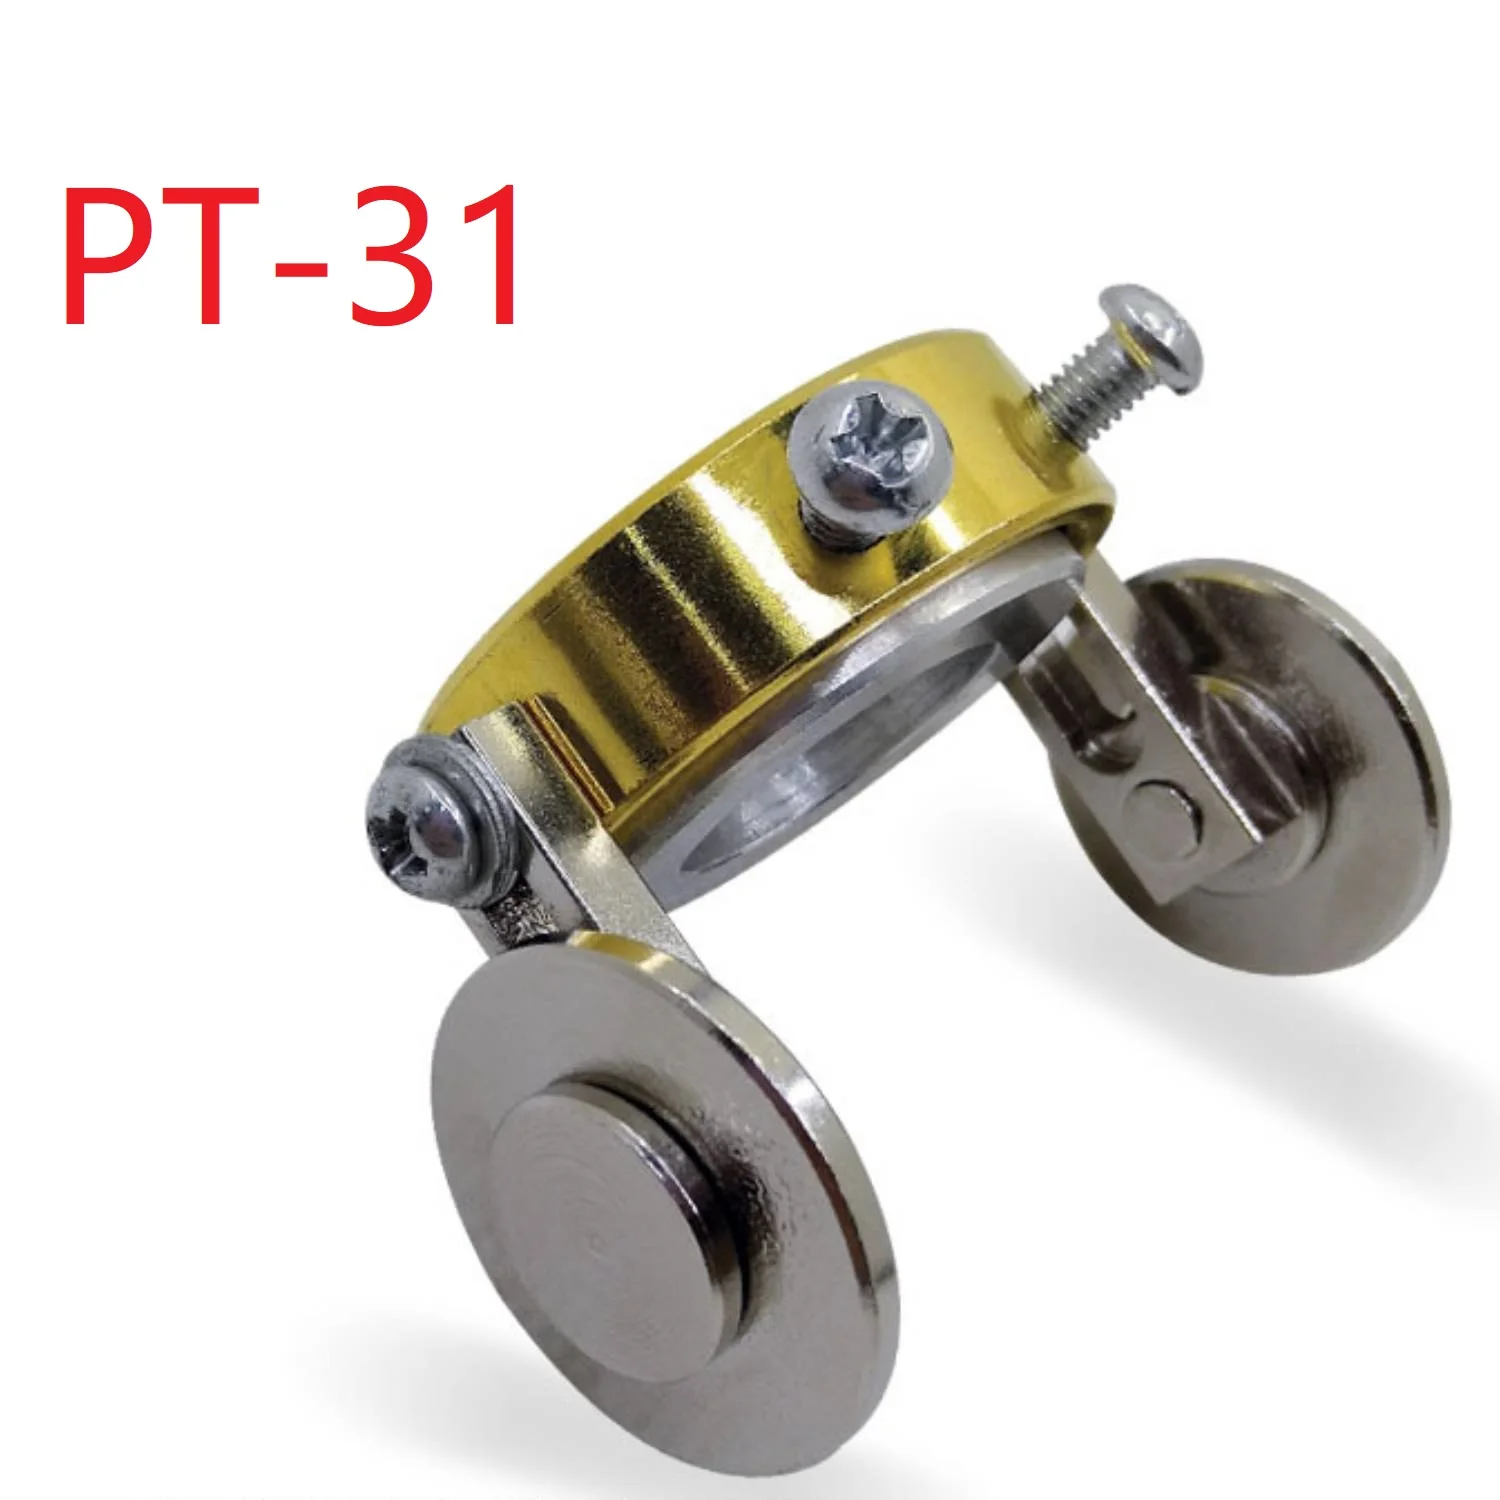 PT-31 PT31 PT 31 Plasma Cutting Torch Spacer Straight Guide Roller Wheel Compass Cutter Part Accessory